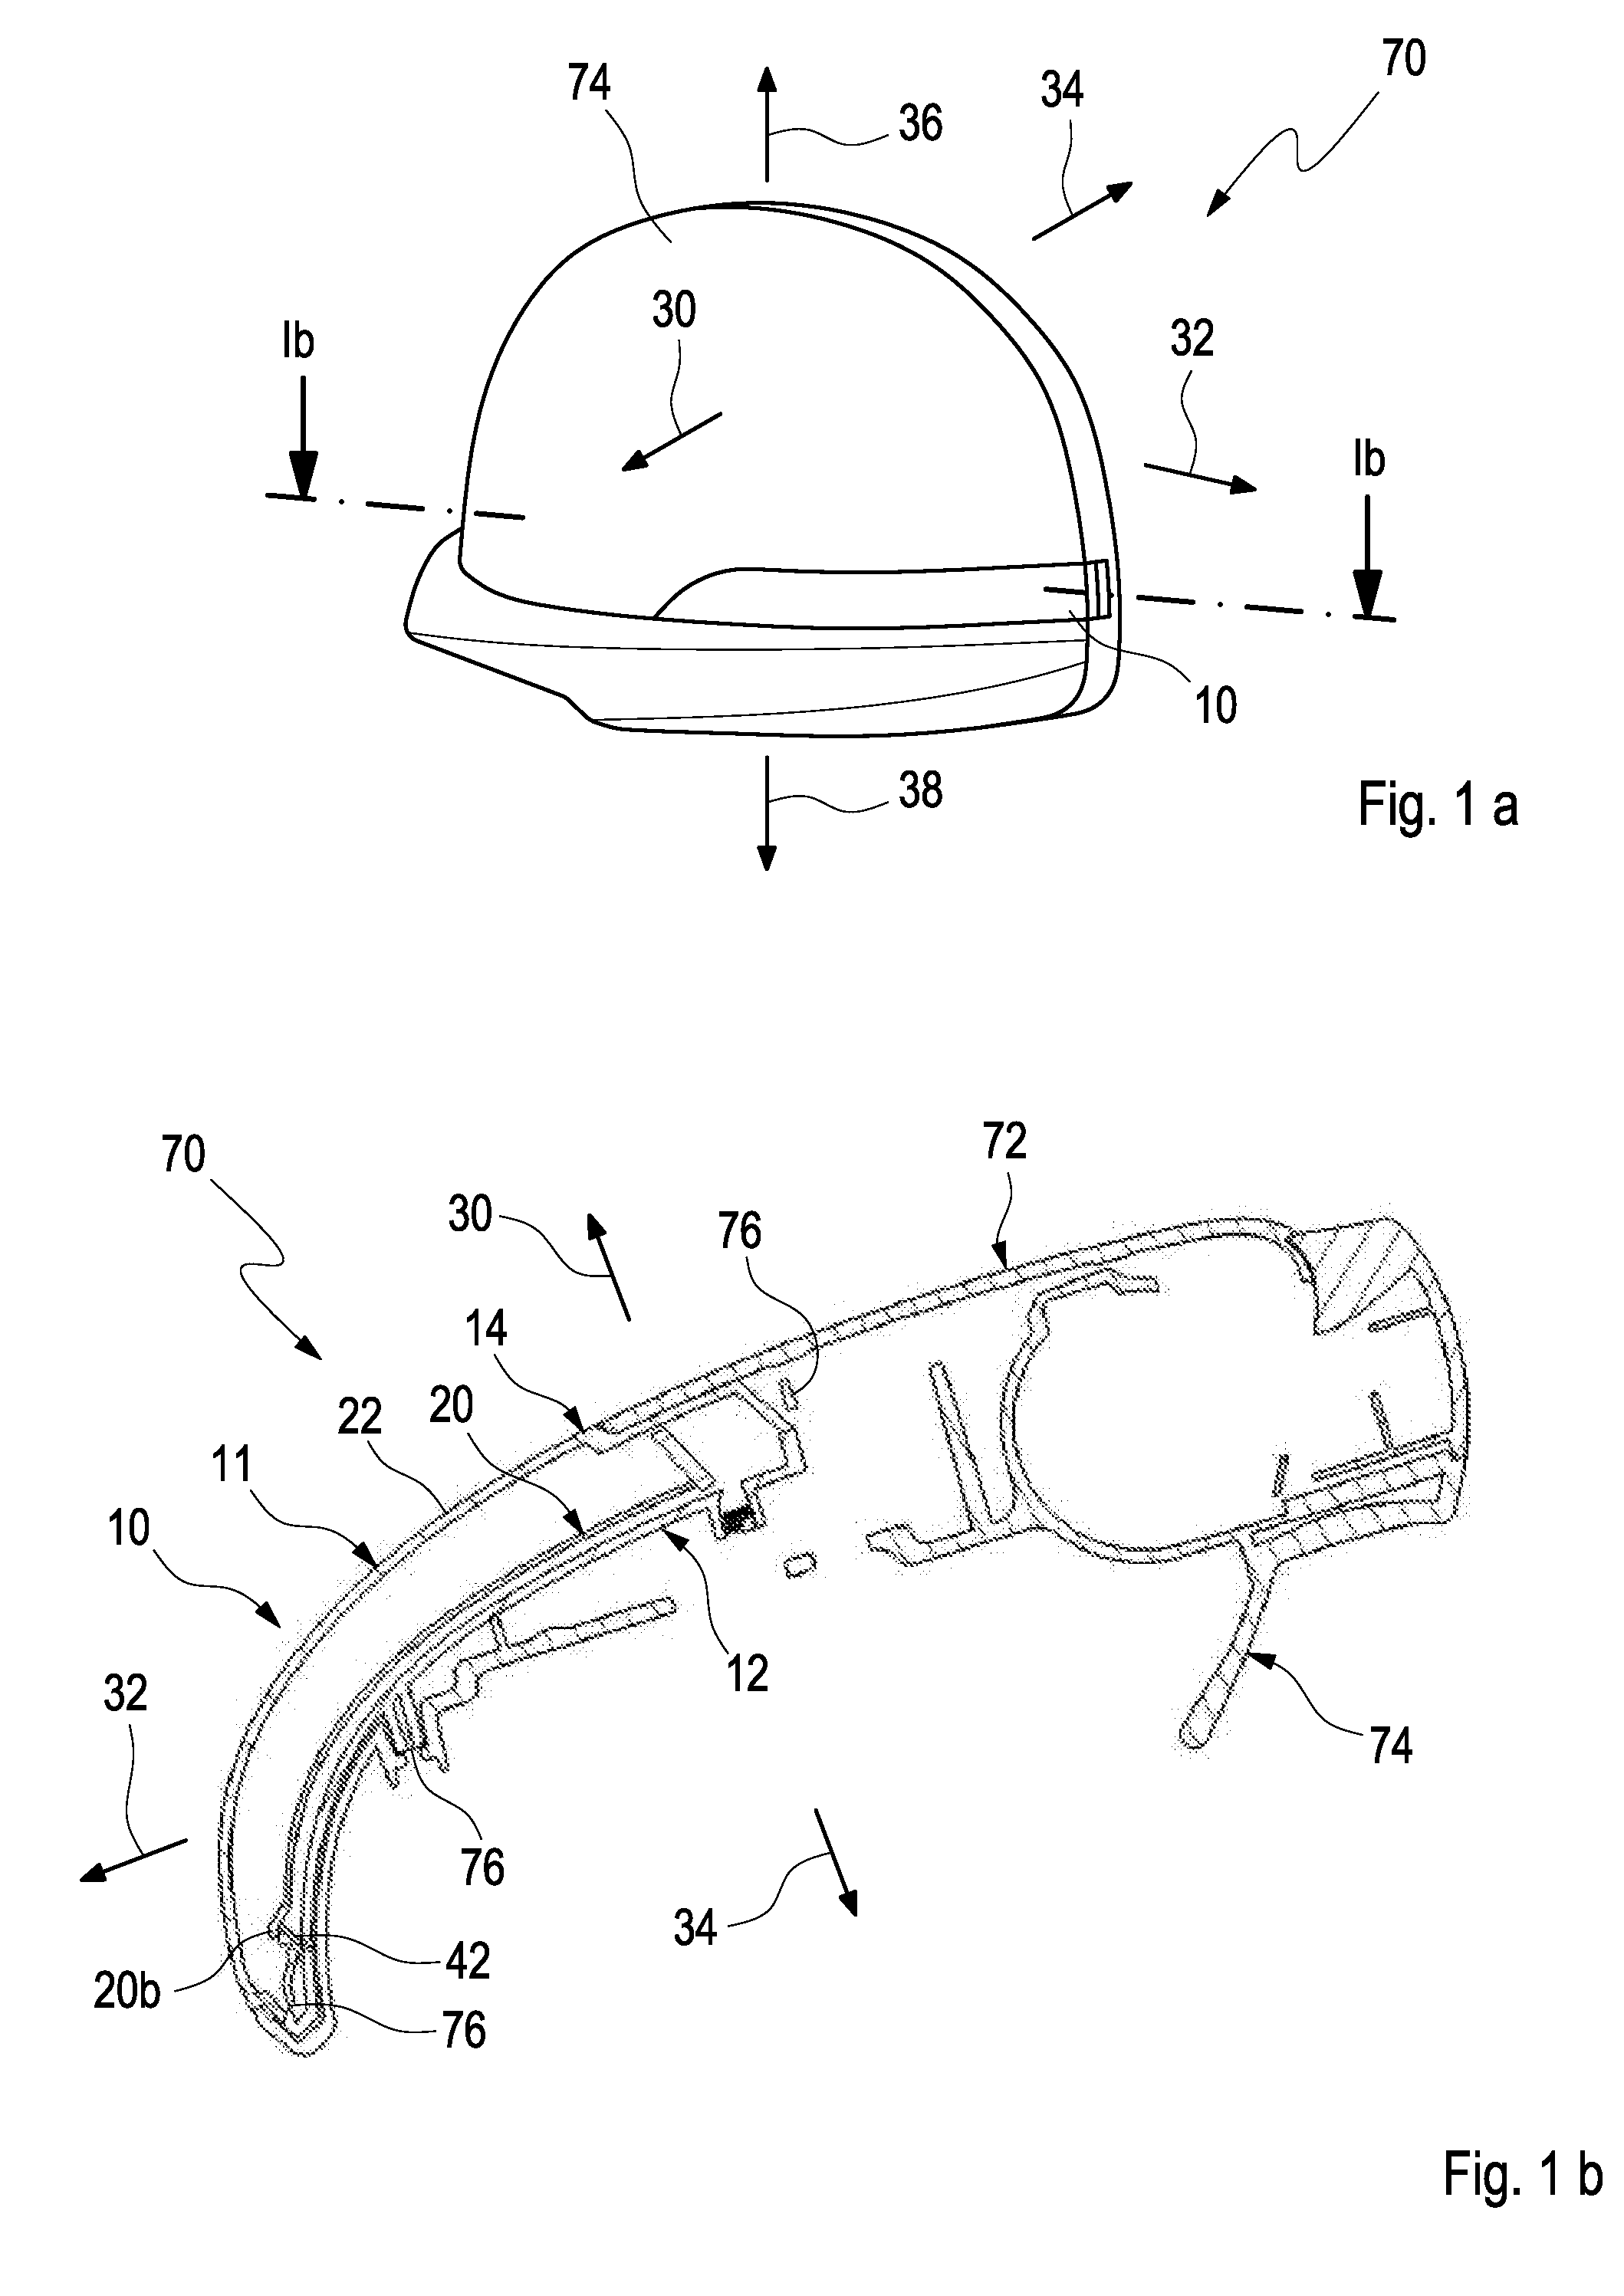 Turn-indicator light module for a vehicle mirror assembly and vehicle mirror assembly comprising a turn-indicator light module